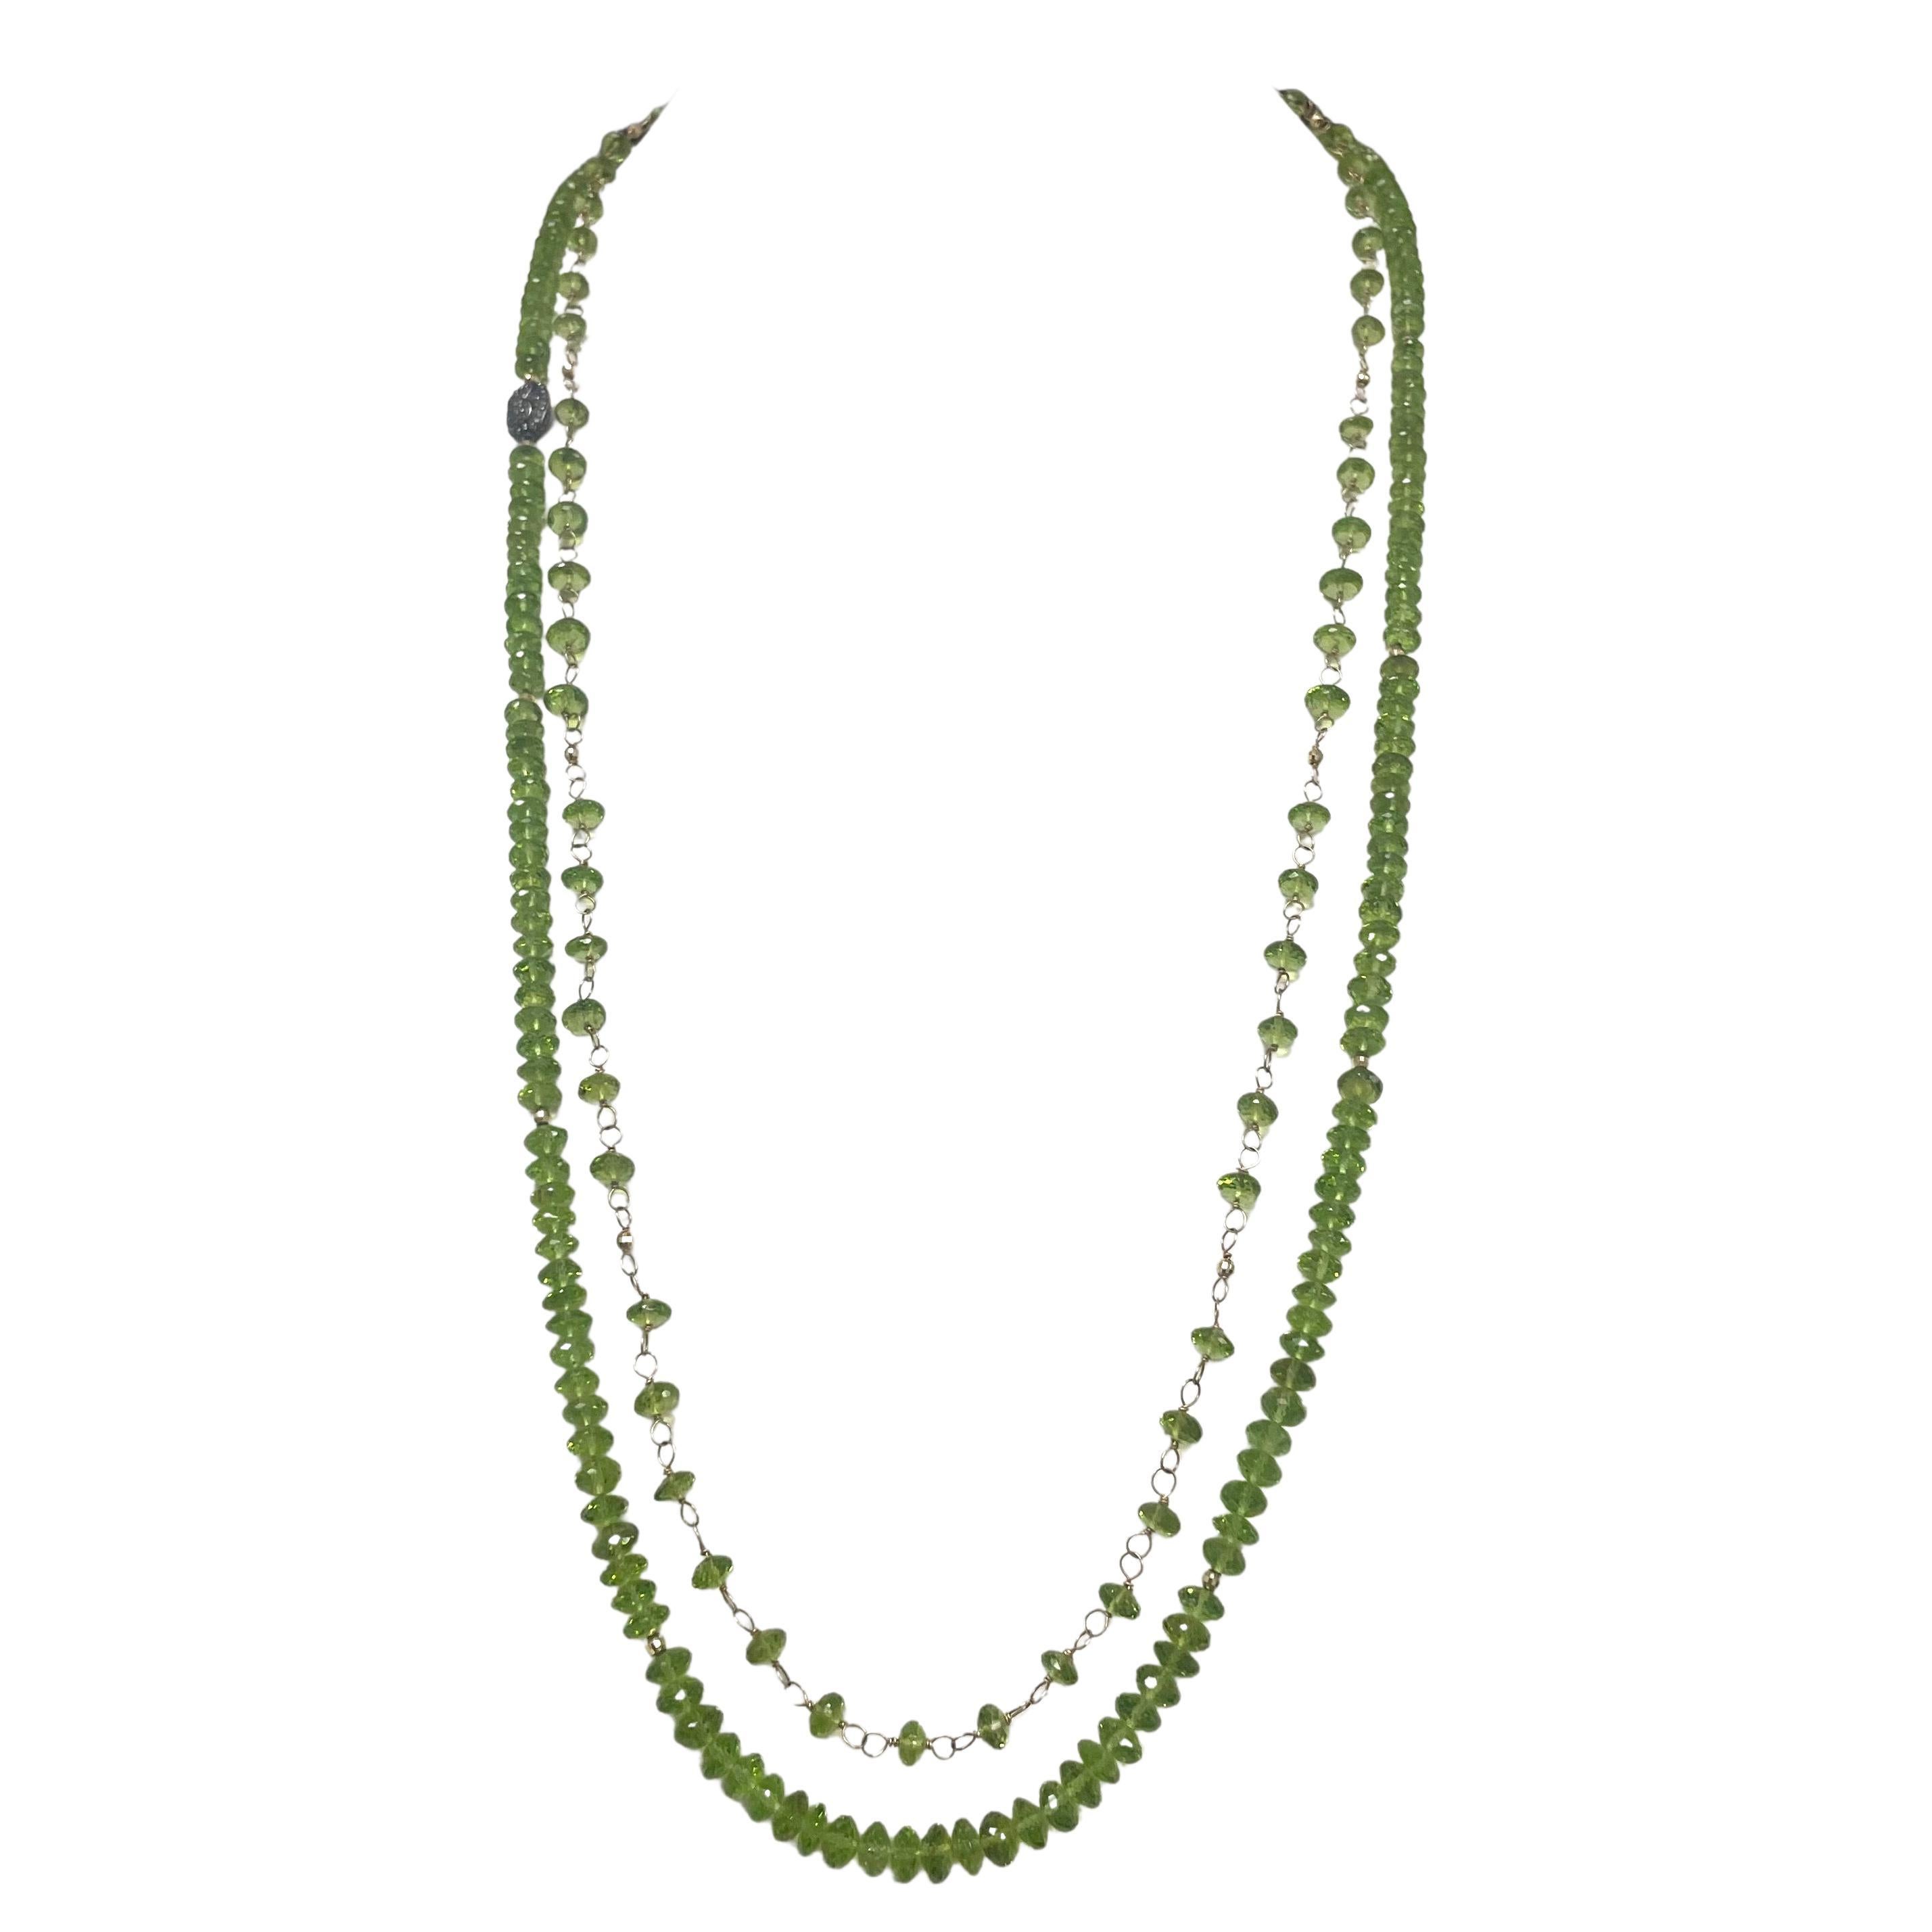 Description
This necklace doesn’t go unnoticed with its exquisite and vibrant, high luster AAA quality Peridot. A beautiful pave diamond accent piece sits elegantly on one side, creating an asymmetrical harmony. Precious, tiny 14k gold balls are